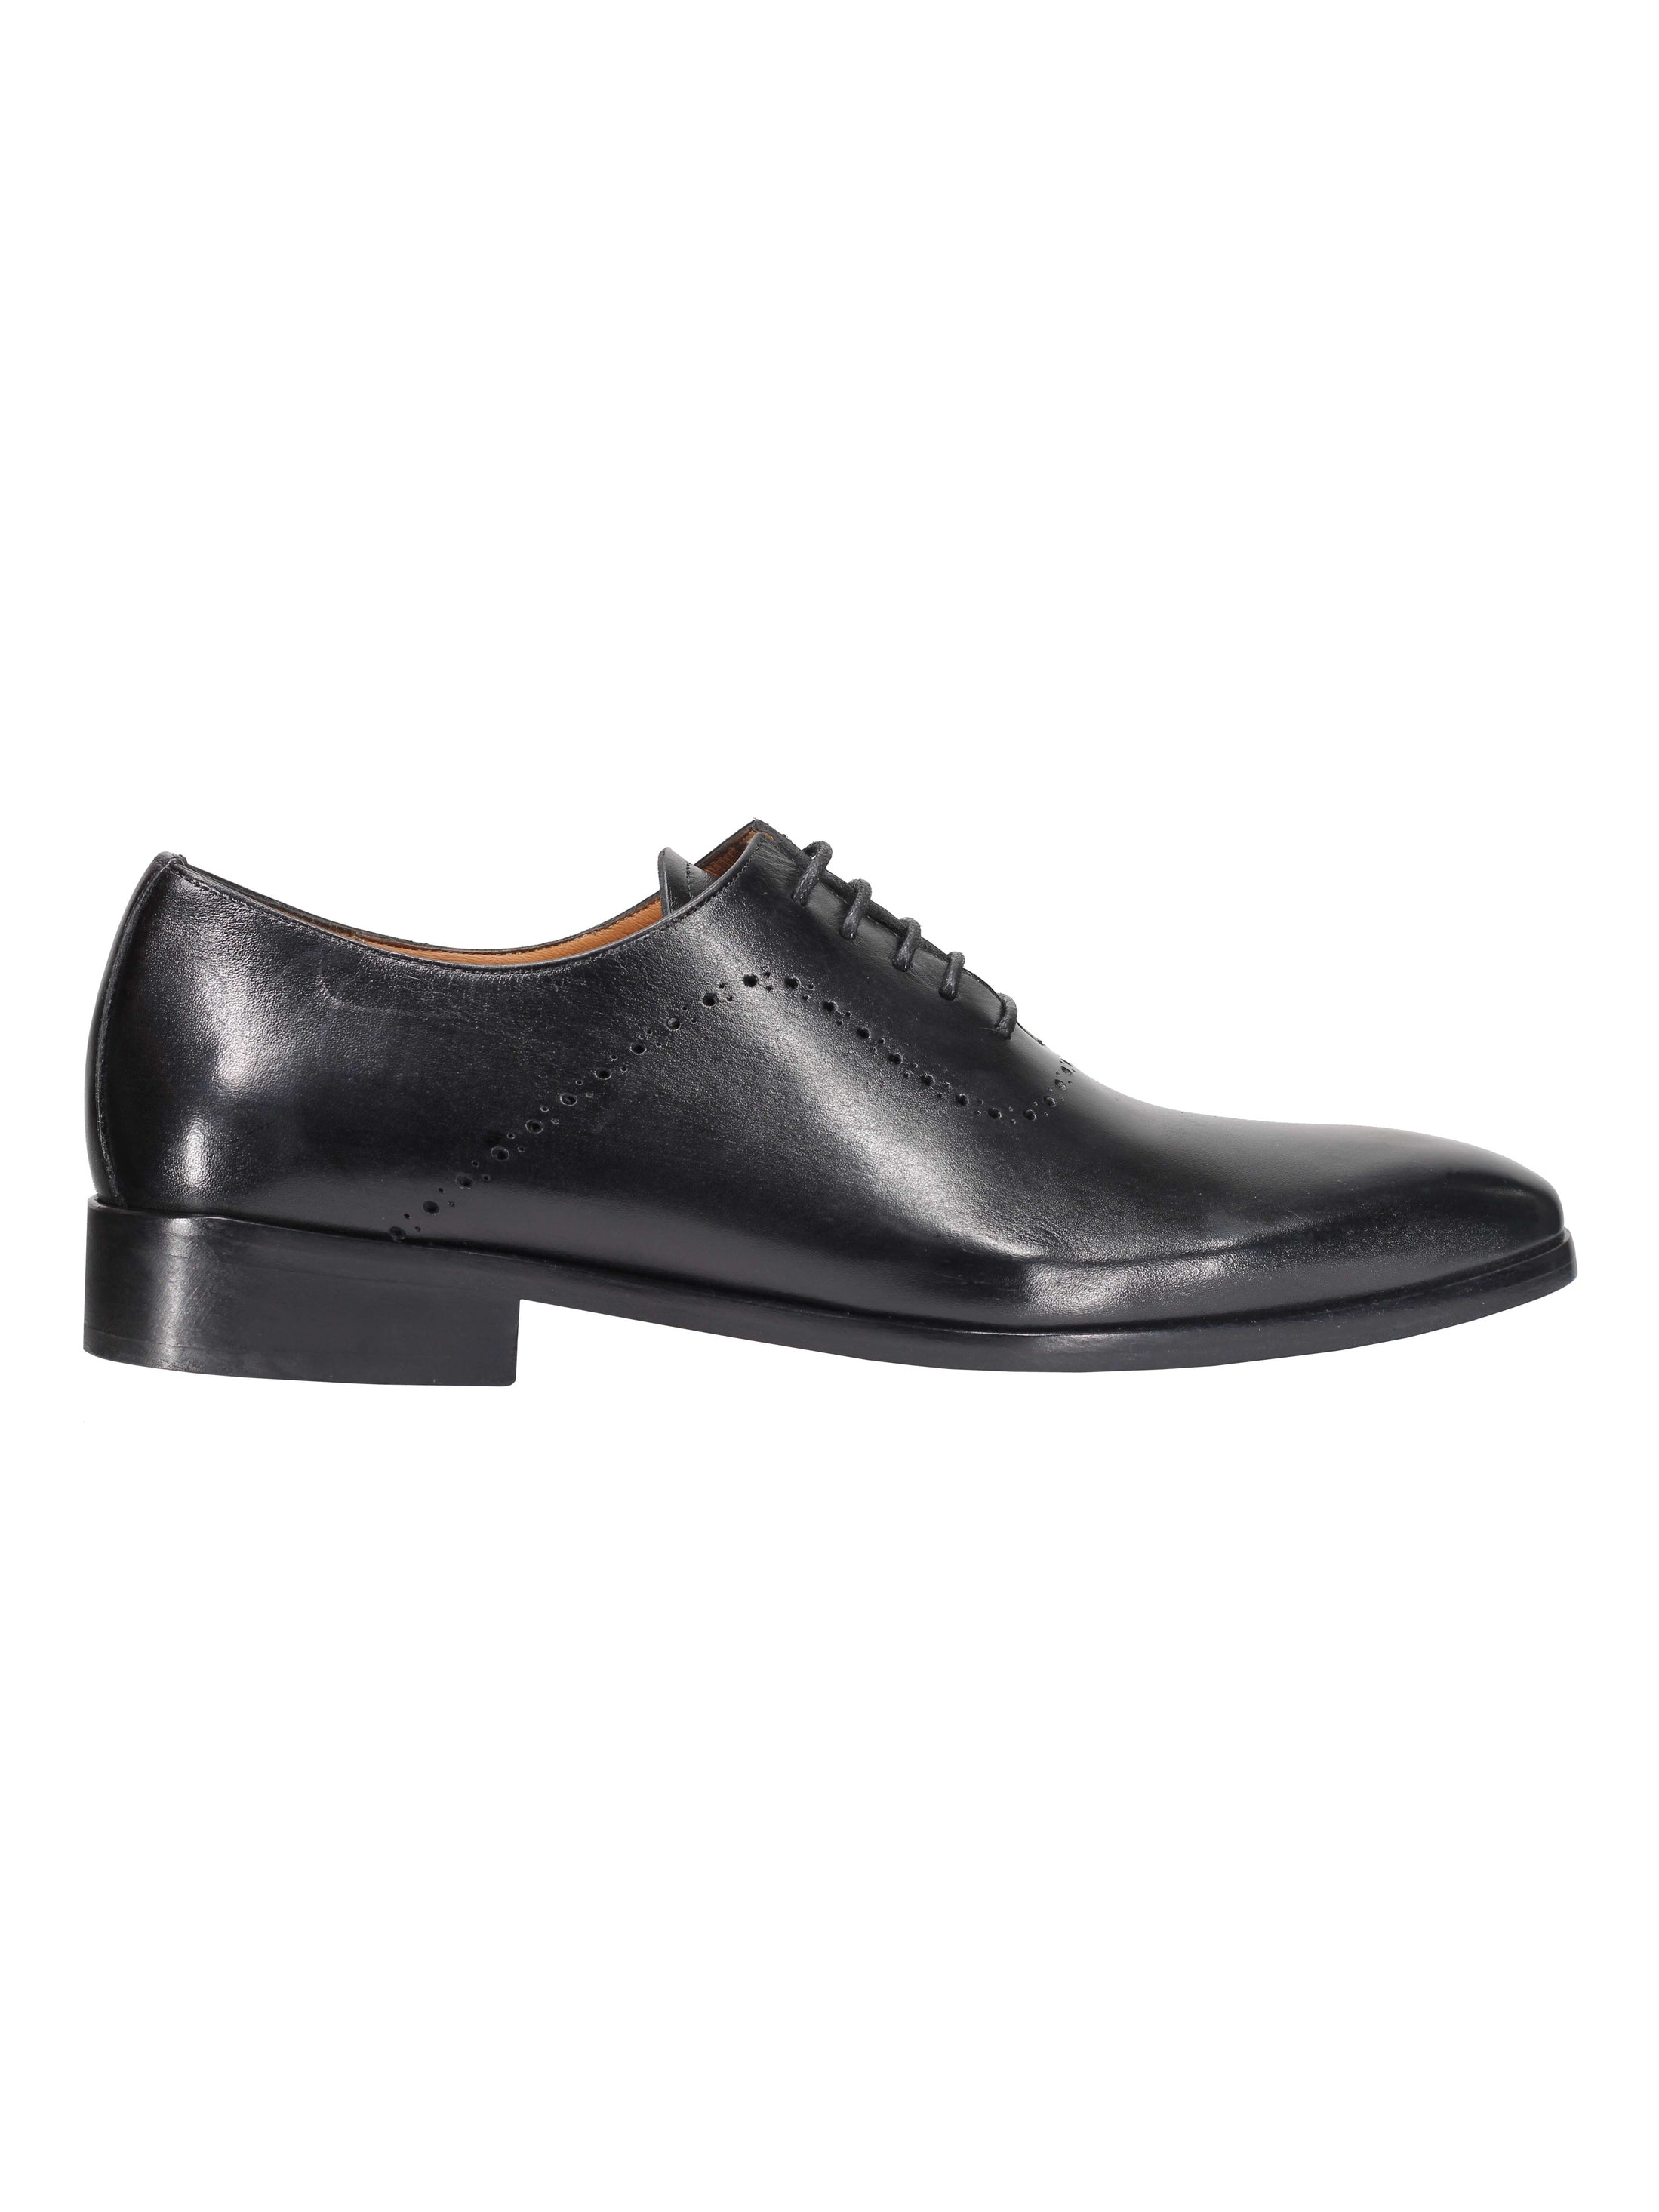 BLACK CALF LEATHER OXFORD LACE UP BROGUE SHOES – XPOSED